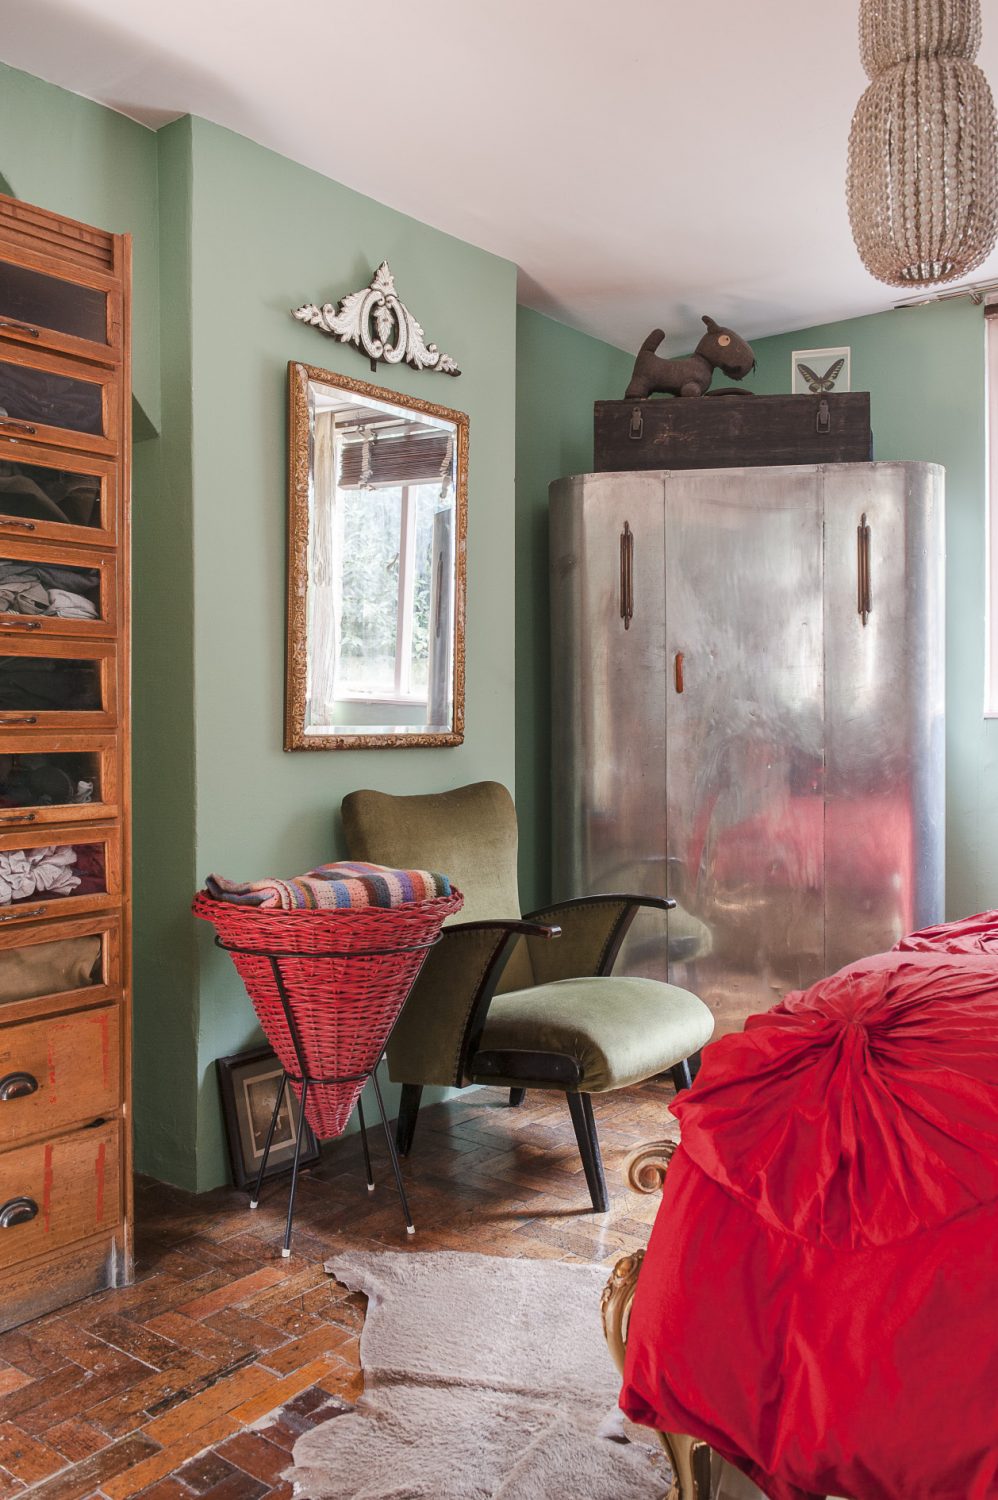 In one corner stands a Deco-style aluminium wardrobe. A toy dog made from an army blanket by Jason’s grandfather during the war sits on top. A 1960s conical French laundry basket stands next to an elegant green 1950s armchair